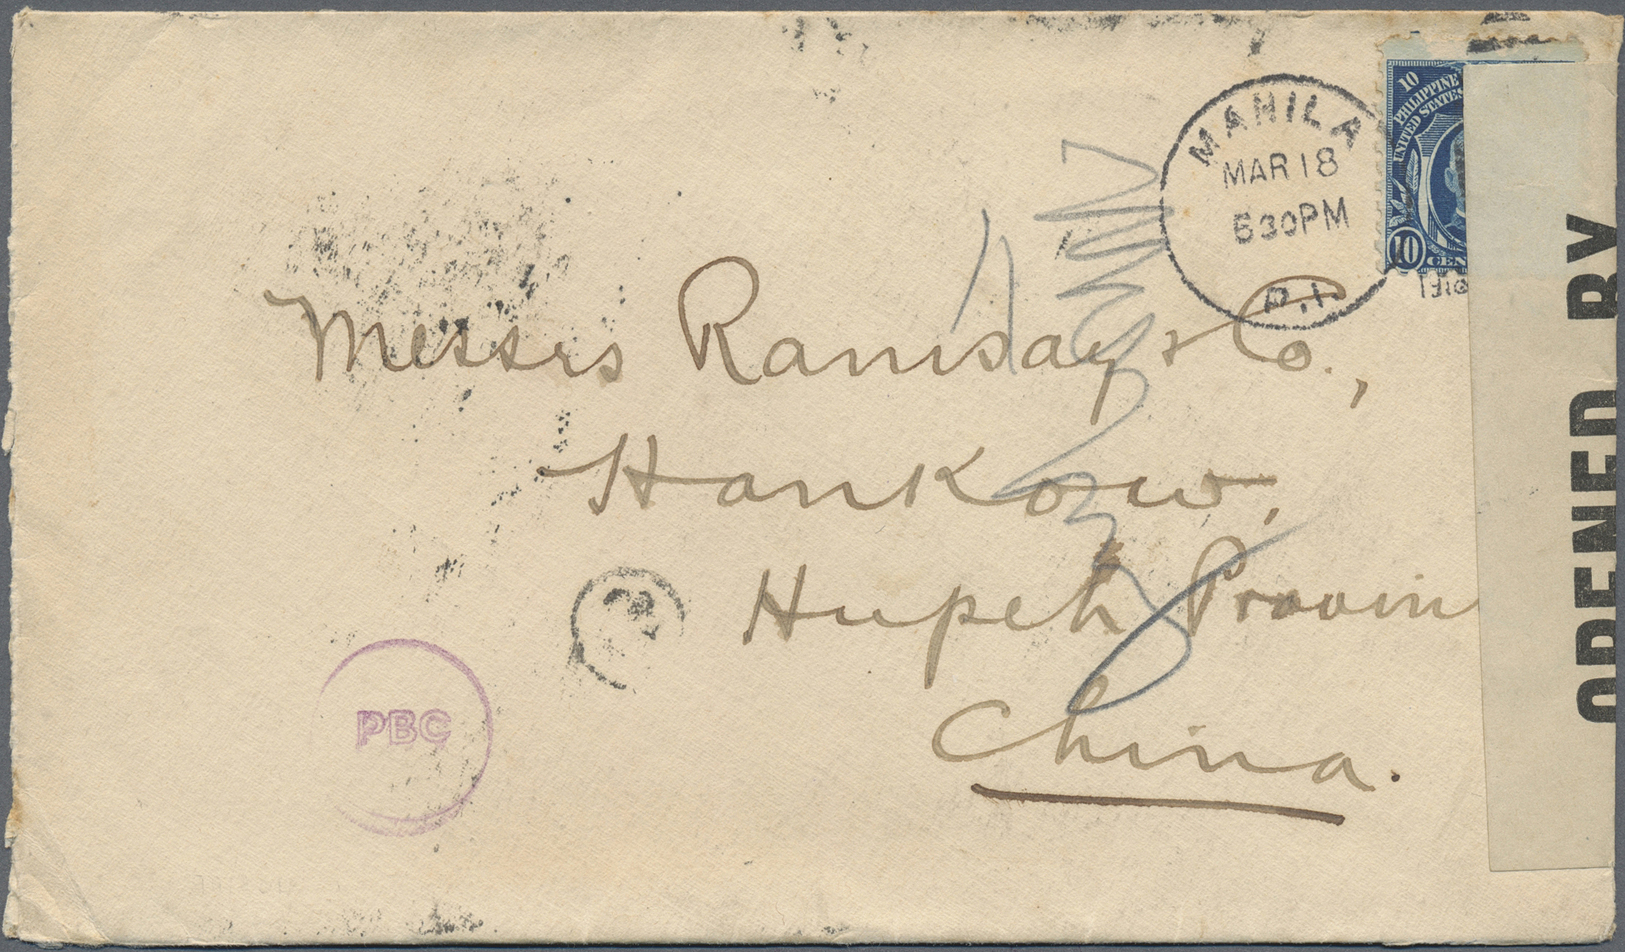 Br Philippinen: 1918. Censored Envelope Addressed To Hankow, Hupeh Province, China Bearing Philippines SG 287, 10c Blue - Philippines